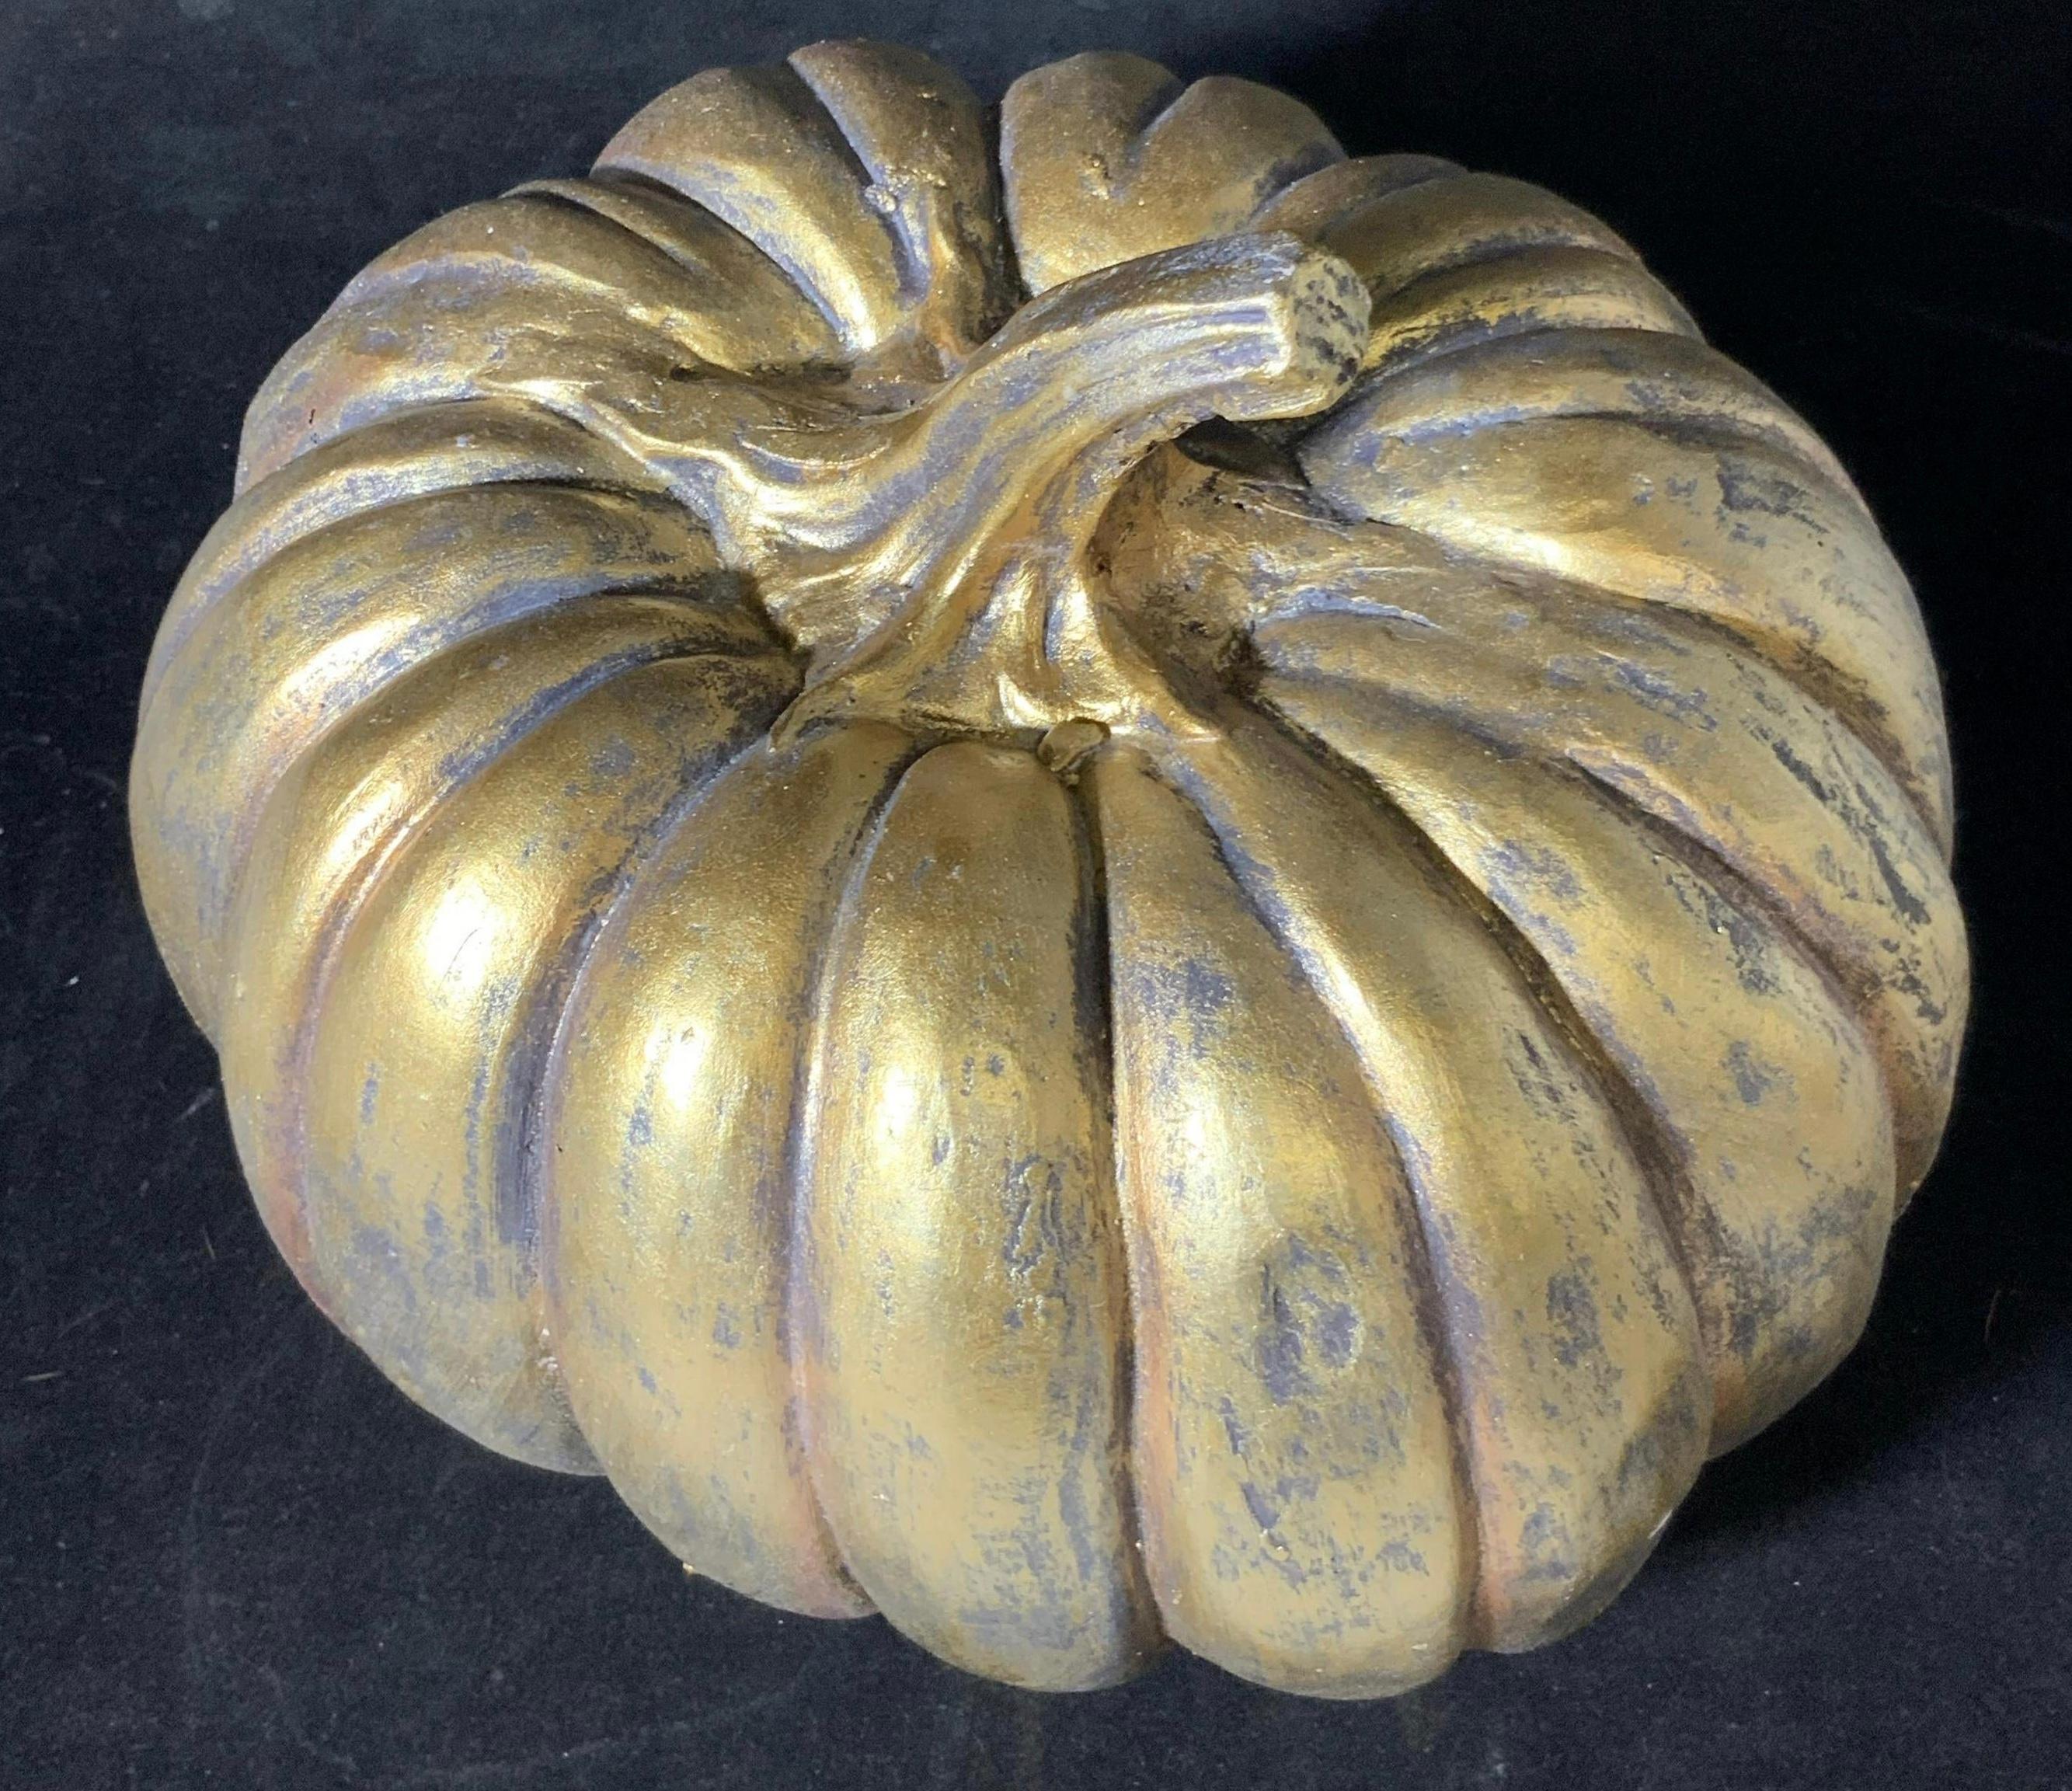 Gold toned hand painted metal pumpkin. Brush strokes throughout. outdoor or indoor decor for the autumn season.
Search terms: Halloween decorations, Halloween accessories, pumpkin, fall decor, autumn decor, outdoor decor, home accents, farmhouse